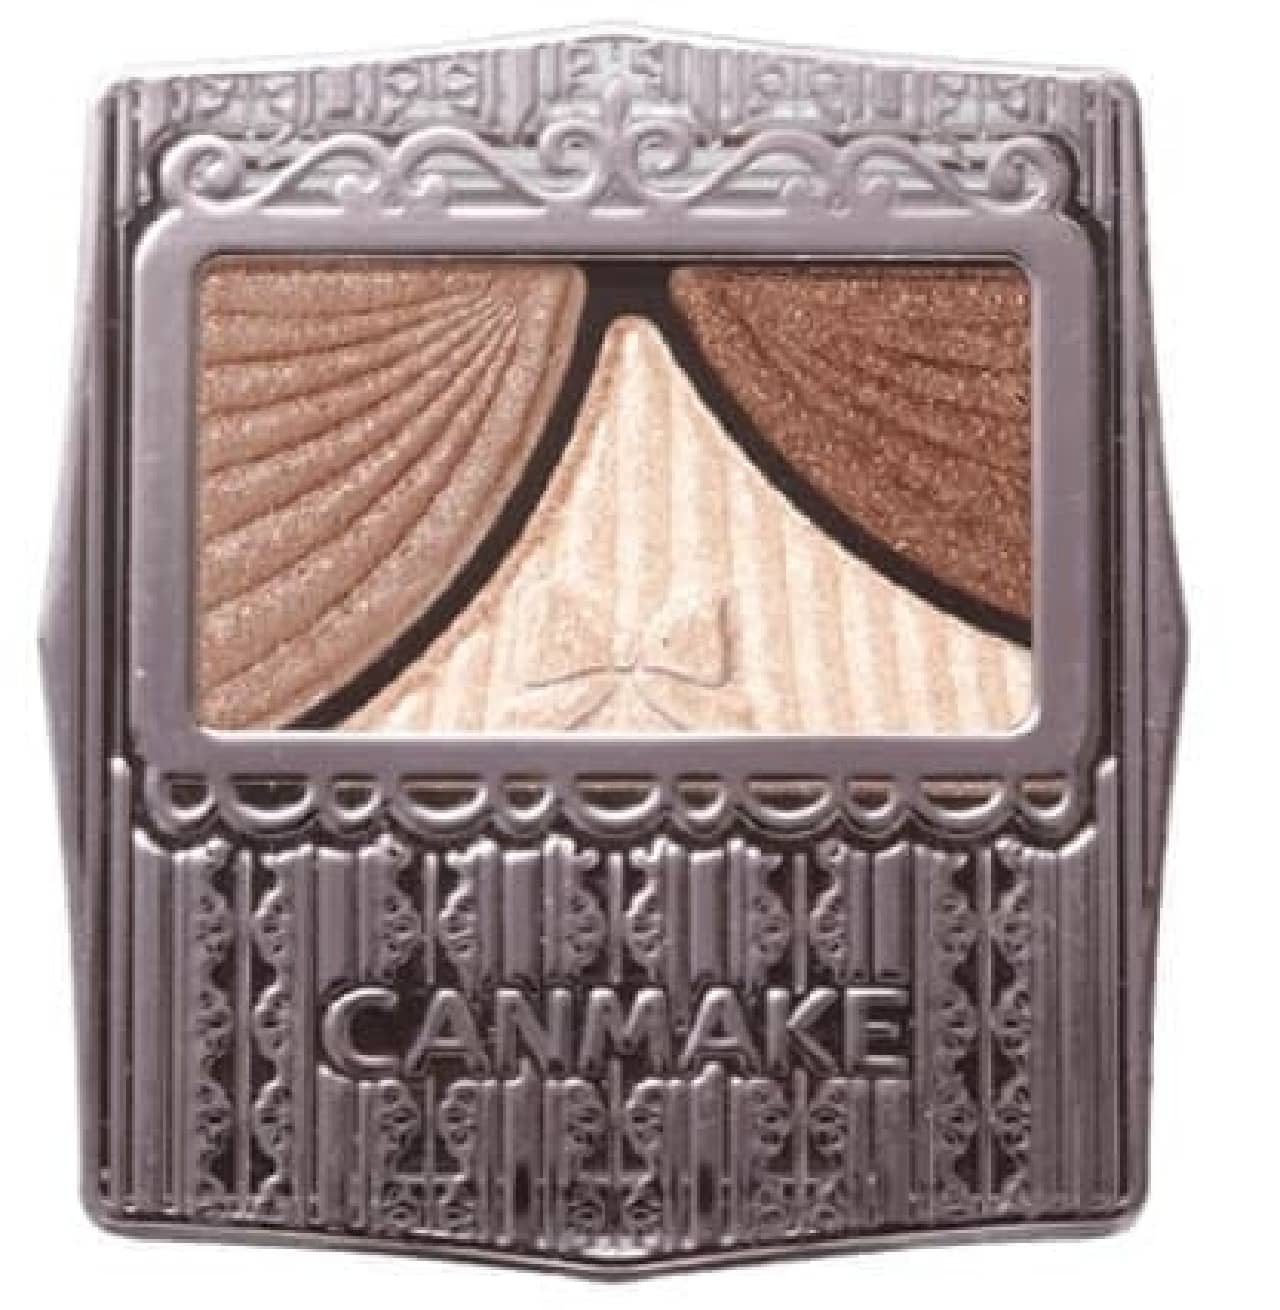 Canmake "Juicy Pure Eyes" New color "13 Champagne Beige"